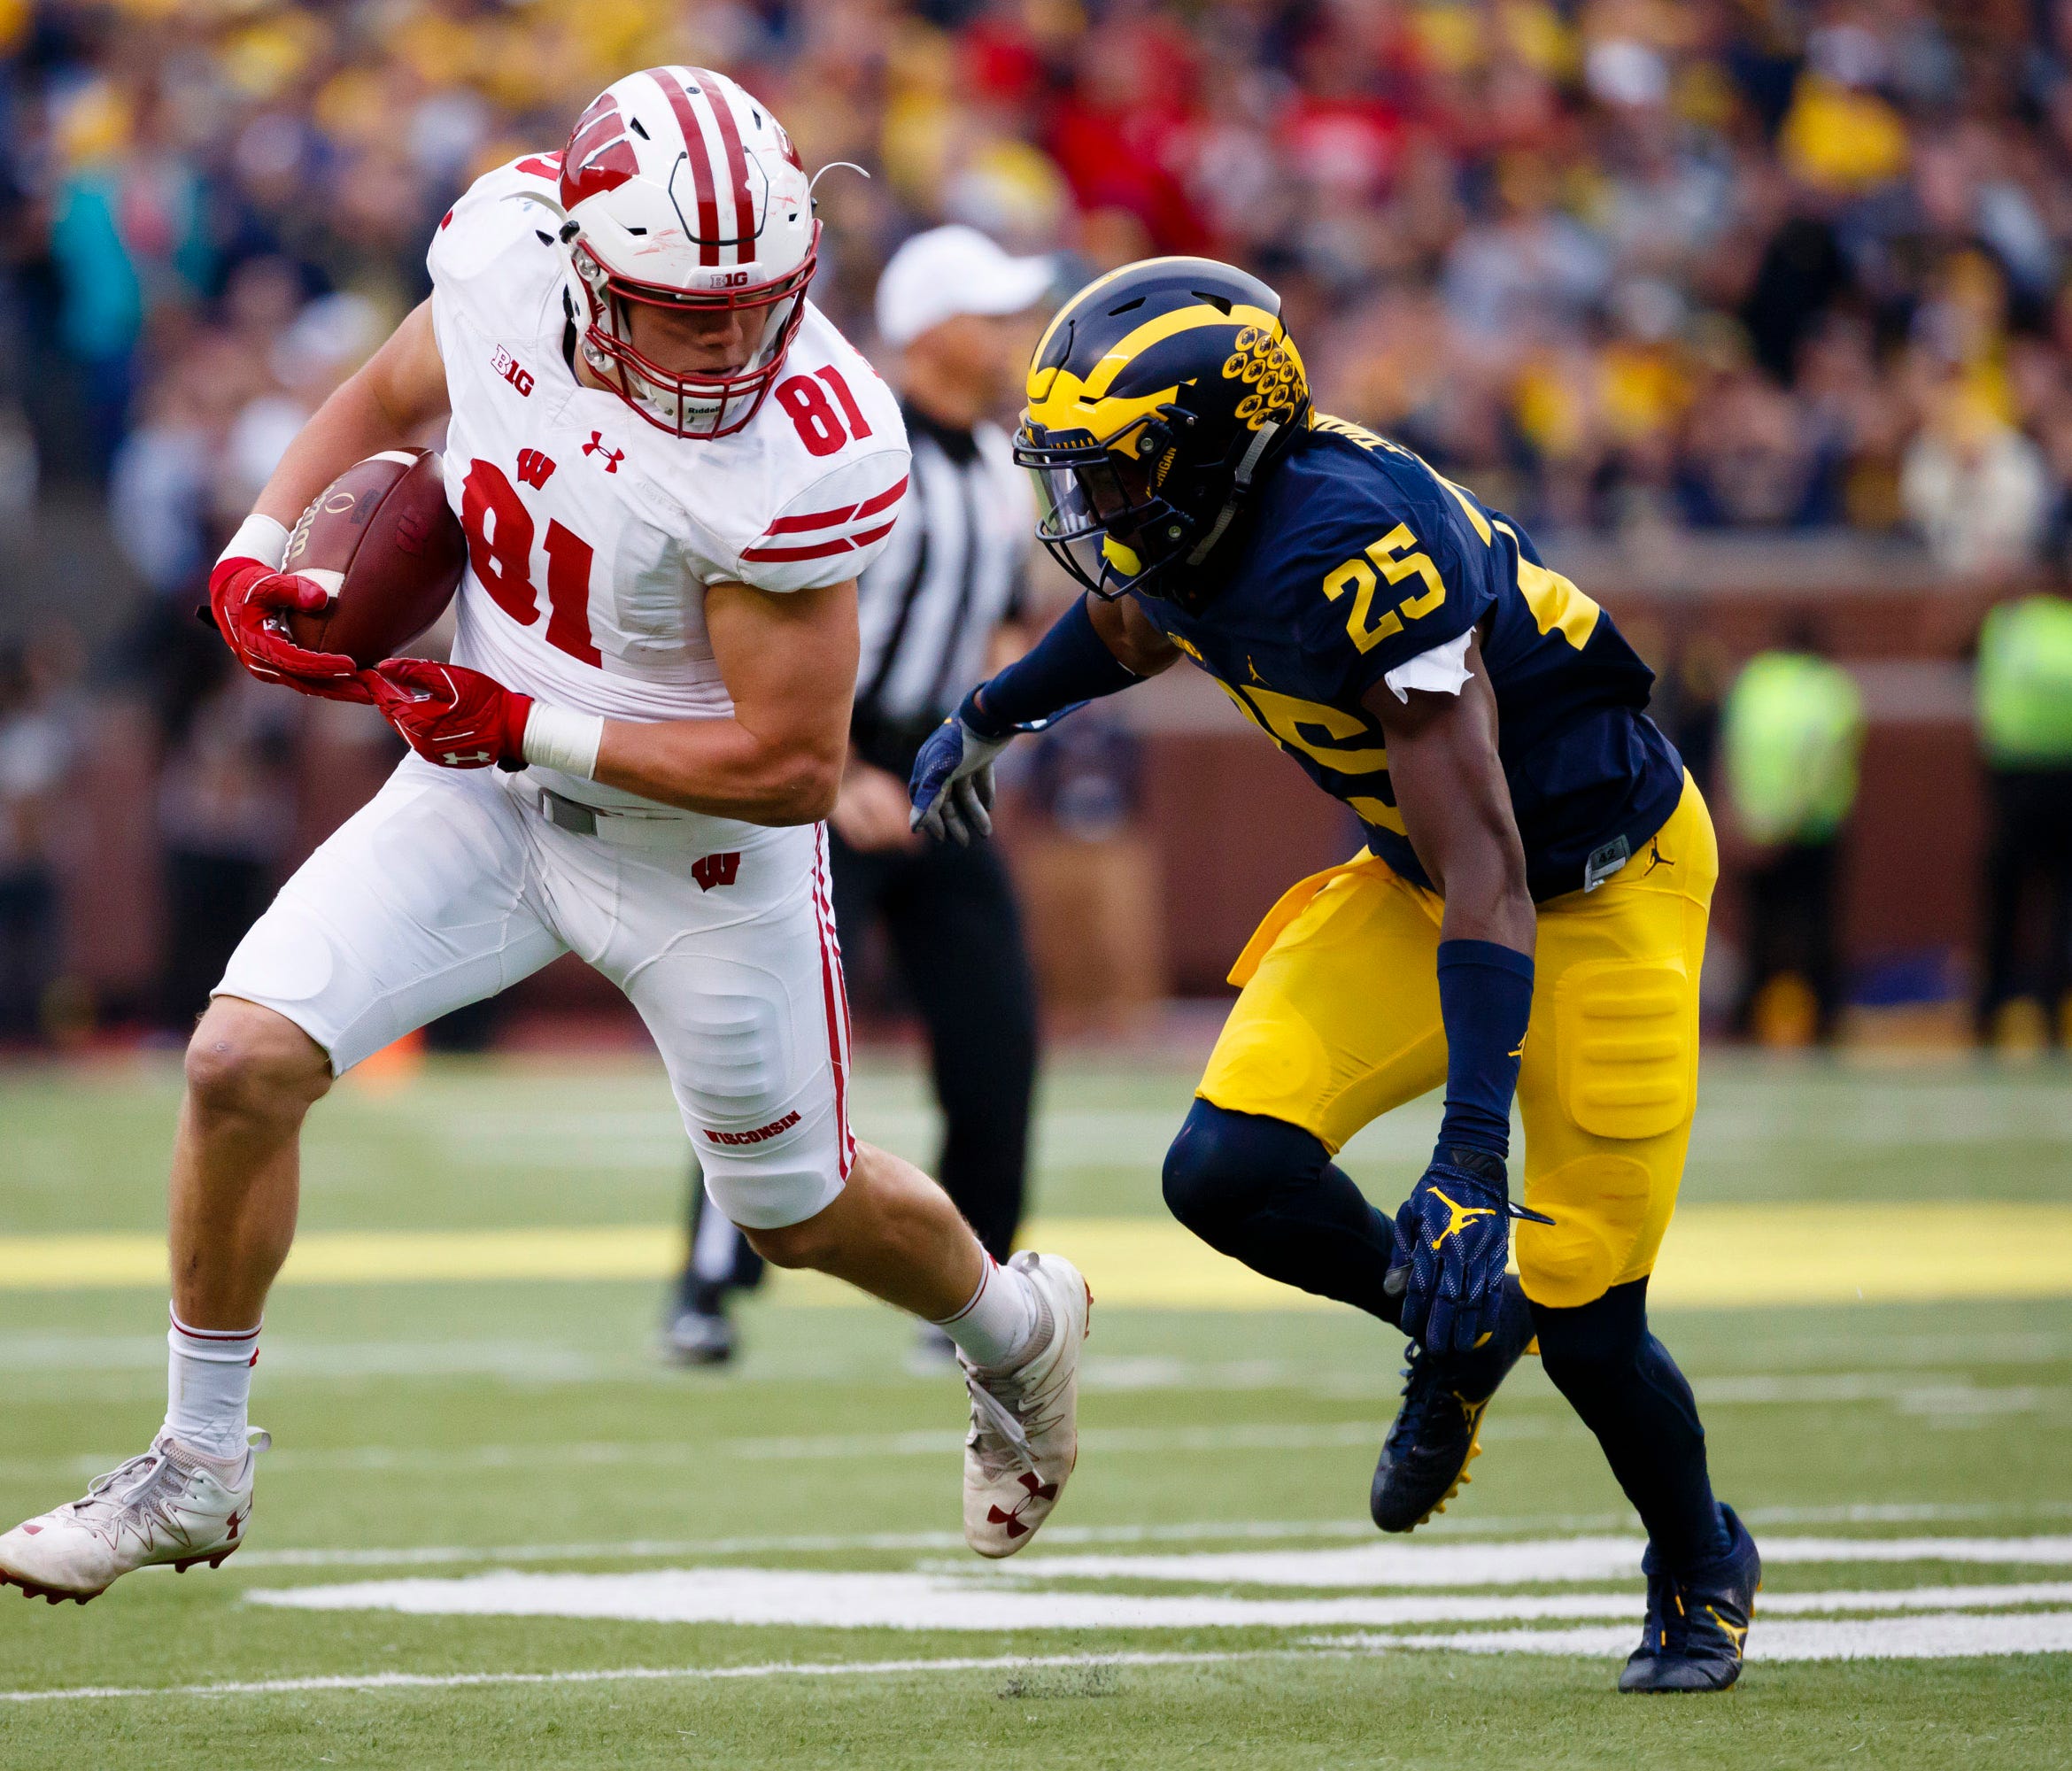 Wisconsin tight end Troy Fumagalli runs after a catch against Michigan during their game in 2016.